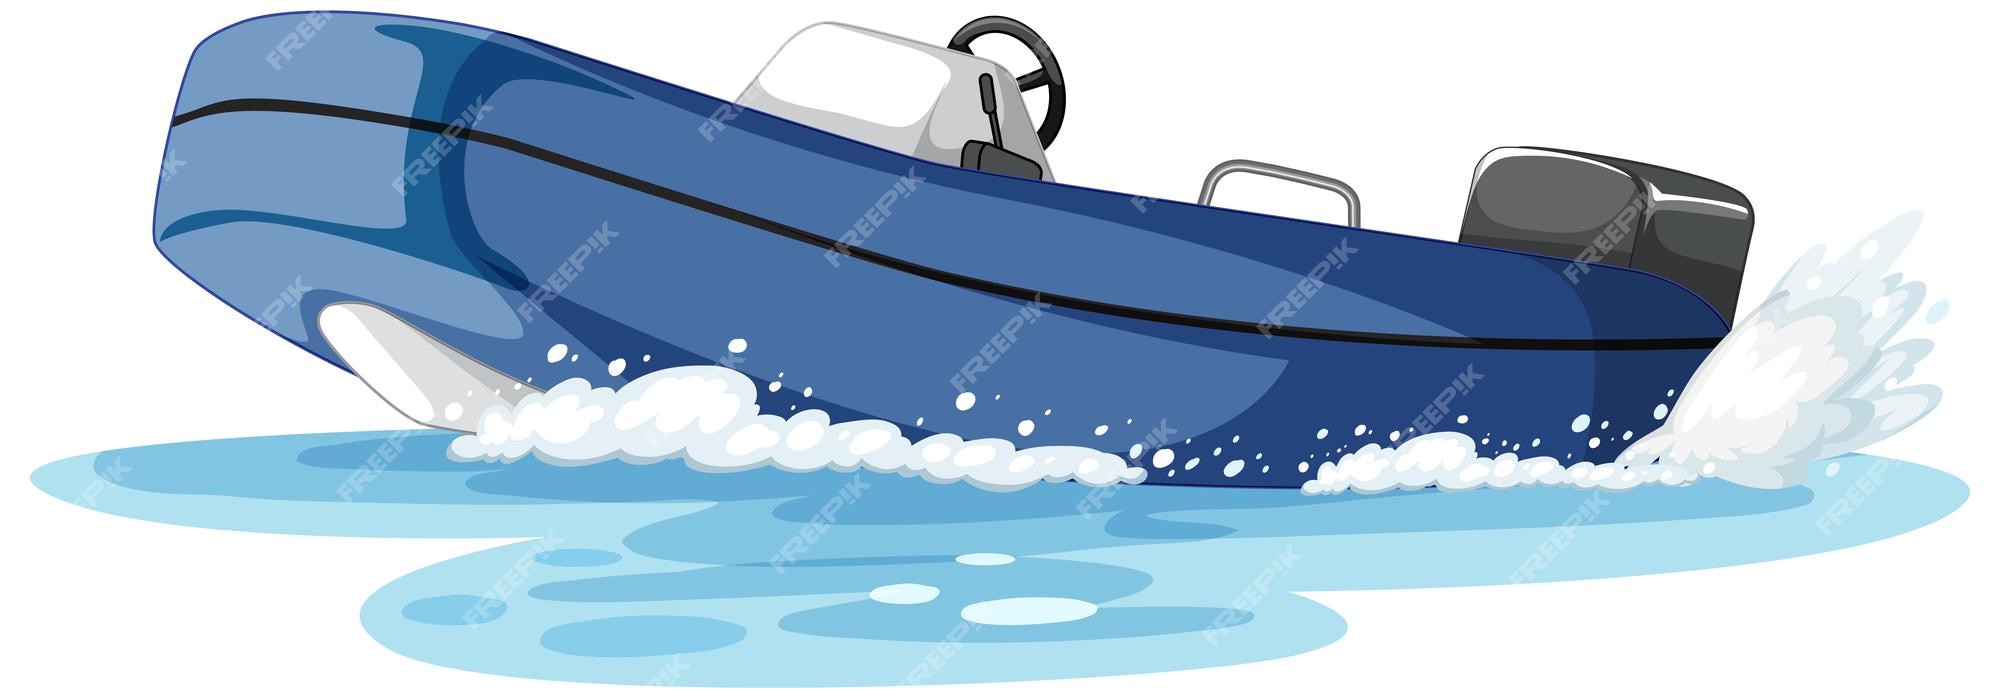 Speed Boat, Powerboat Vector & Photo (Free Trial)